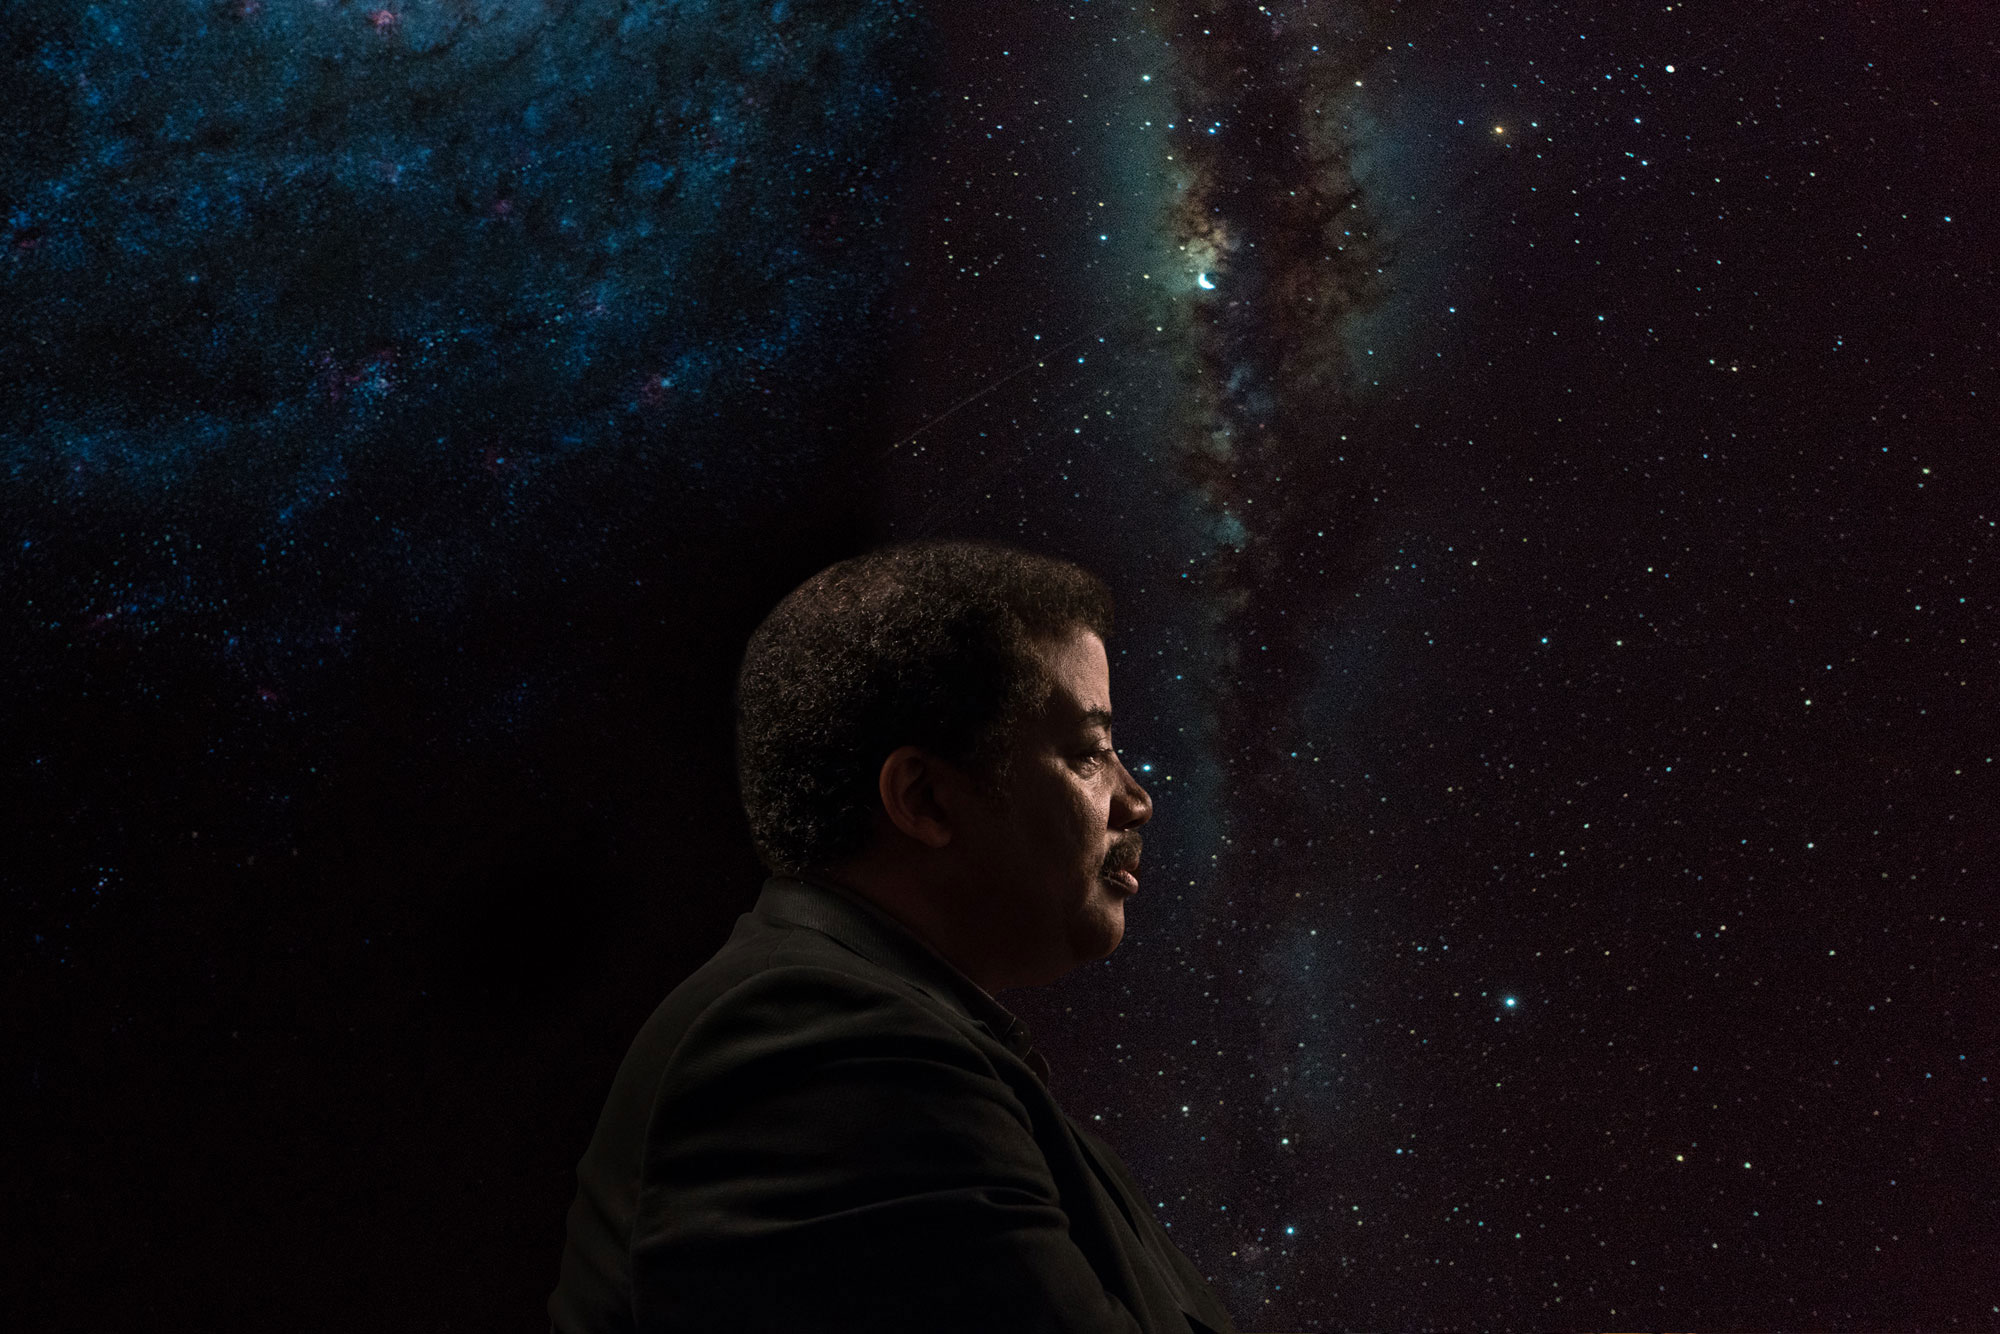 The Truth is in the Stars film produced by William Shatner w/Netflix featuring Ben Stiller & Neil deGrasse Tyson